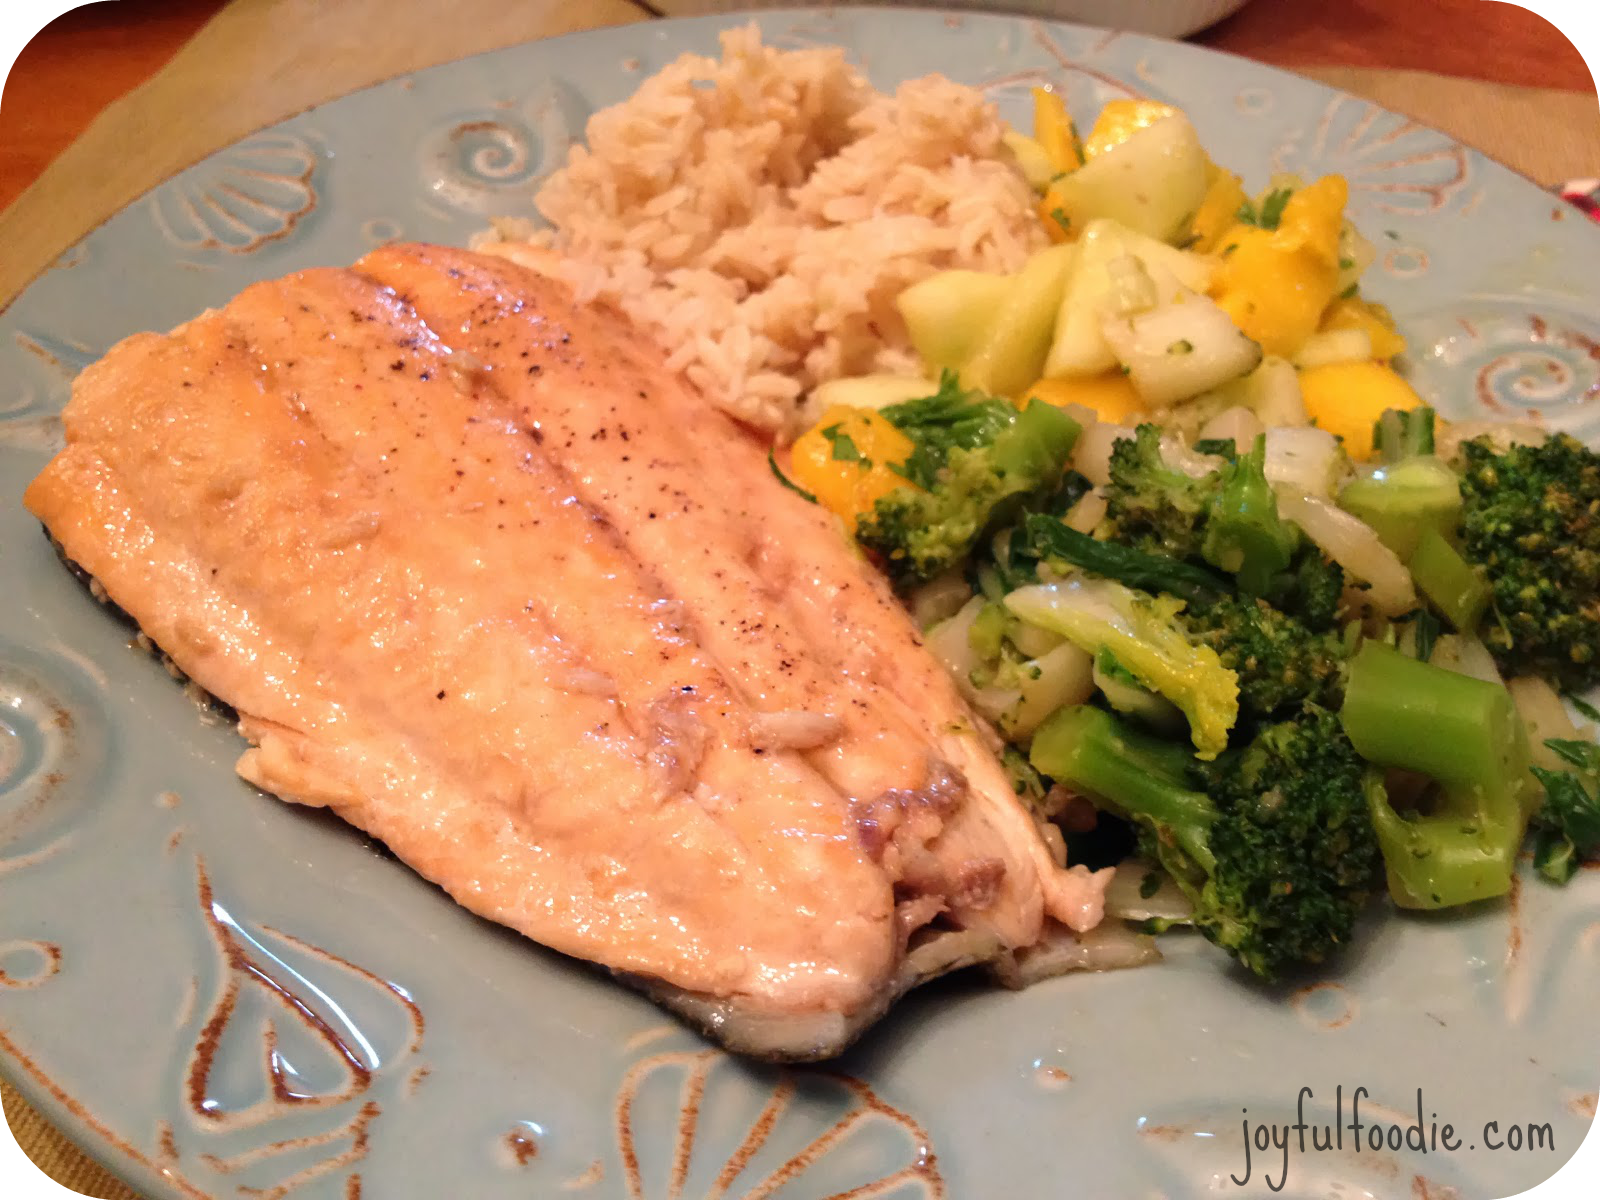 Pan seared "smoked" sweet salmon; great with sauteed bok choy and broccoli, easy weeknight dinner! 